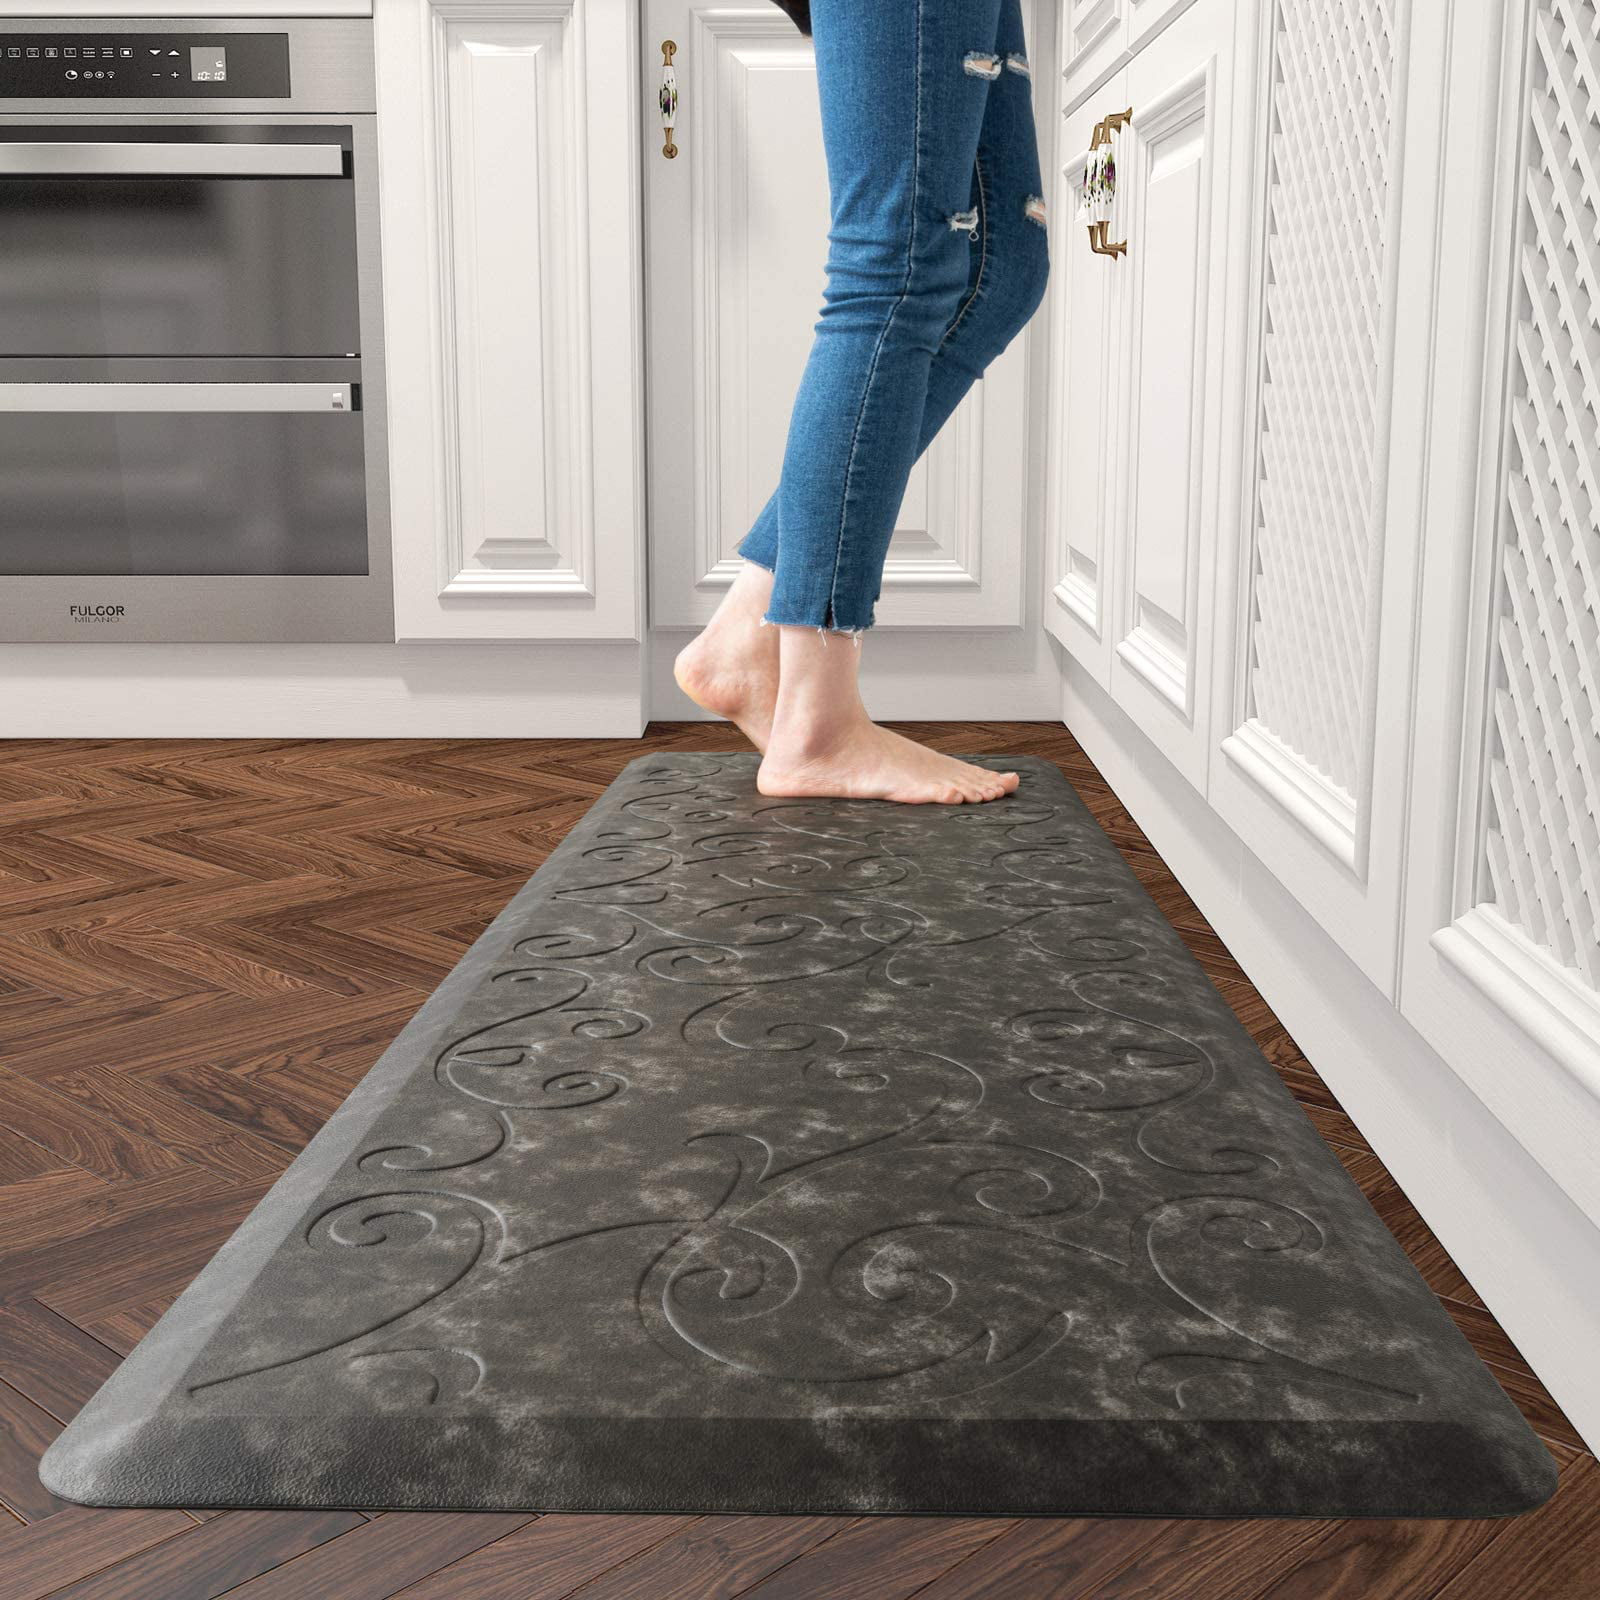 Floral Kitchen Floor Mats Cushioned Anti Fatigue for House 1 2 Inch